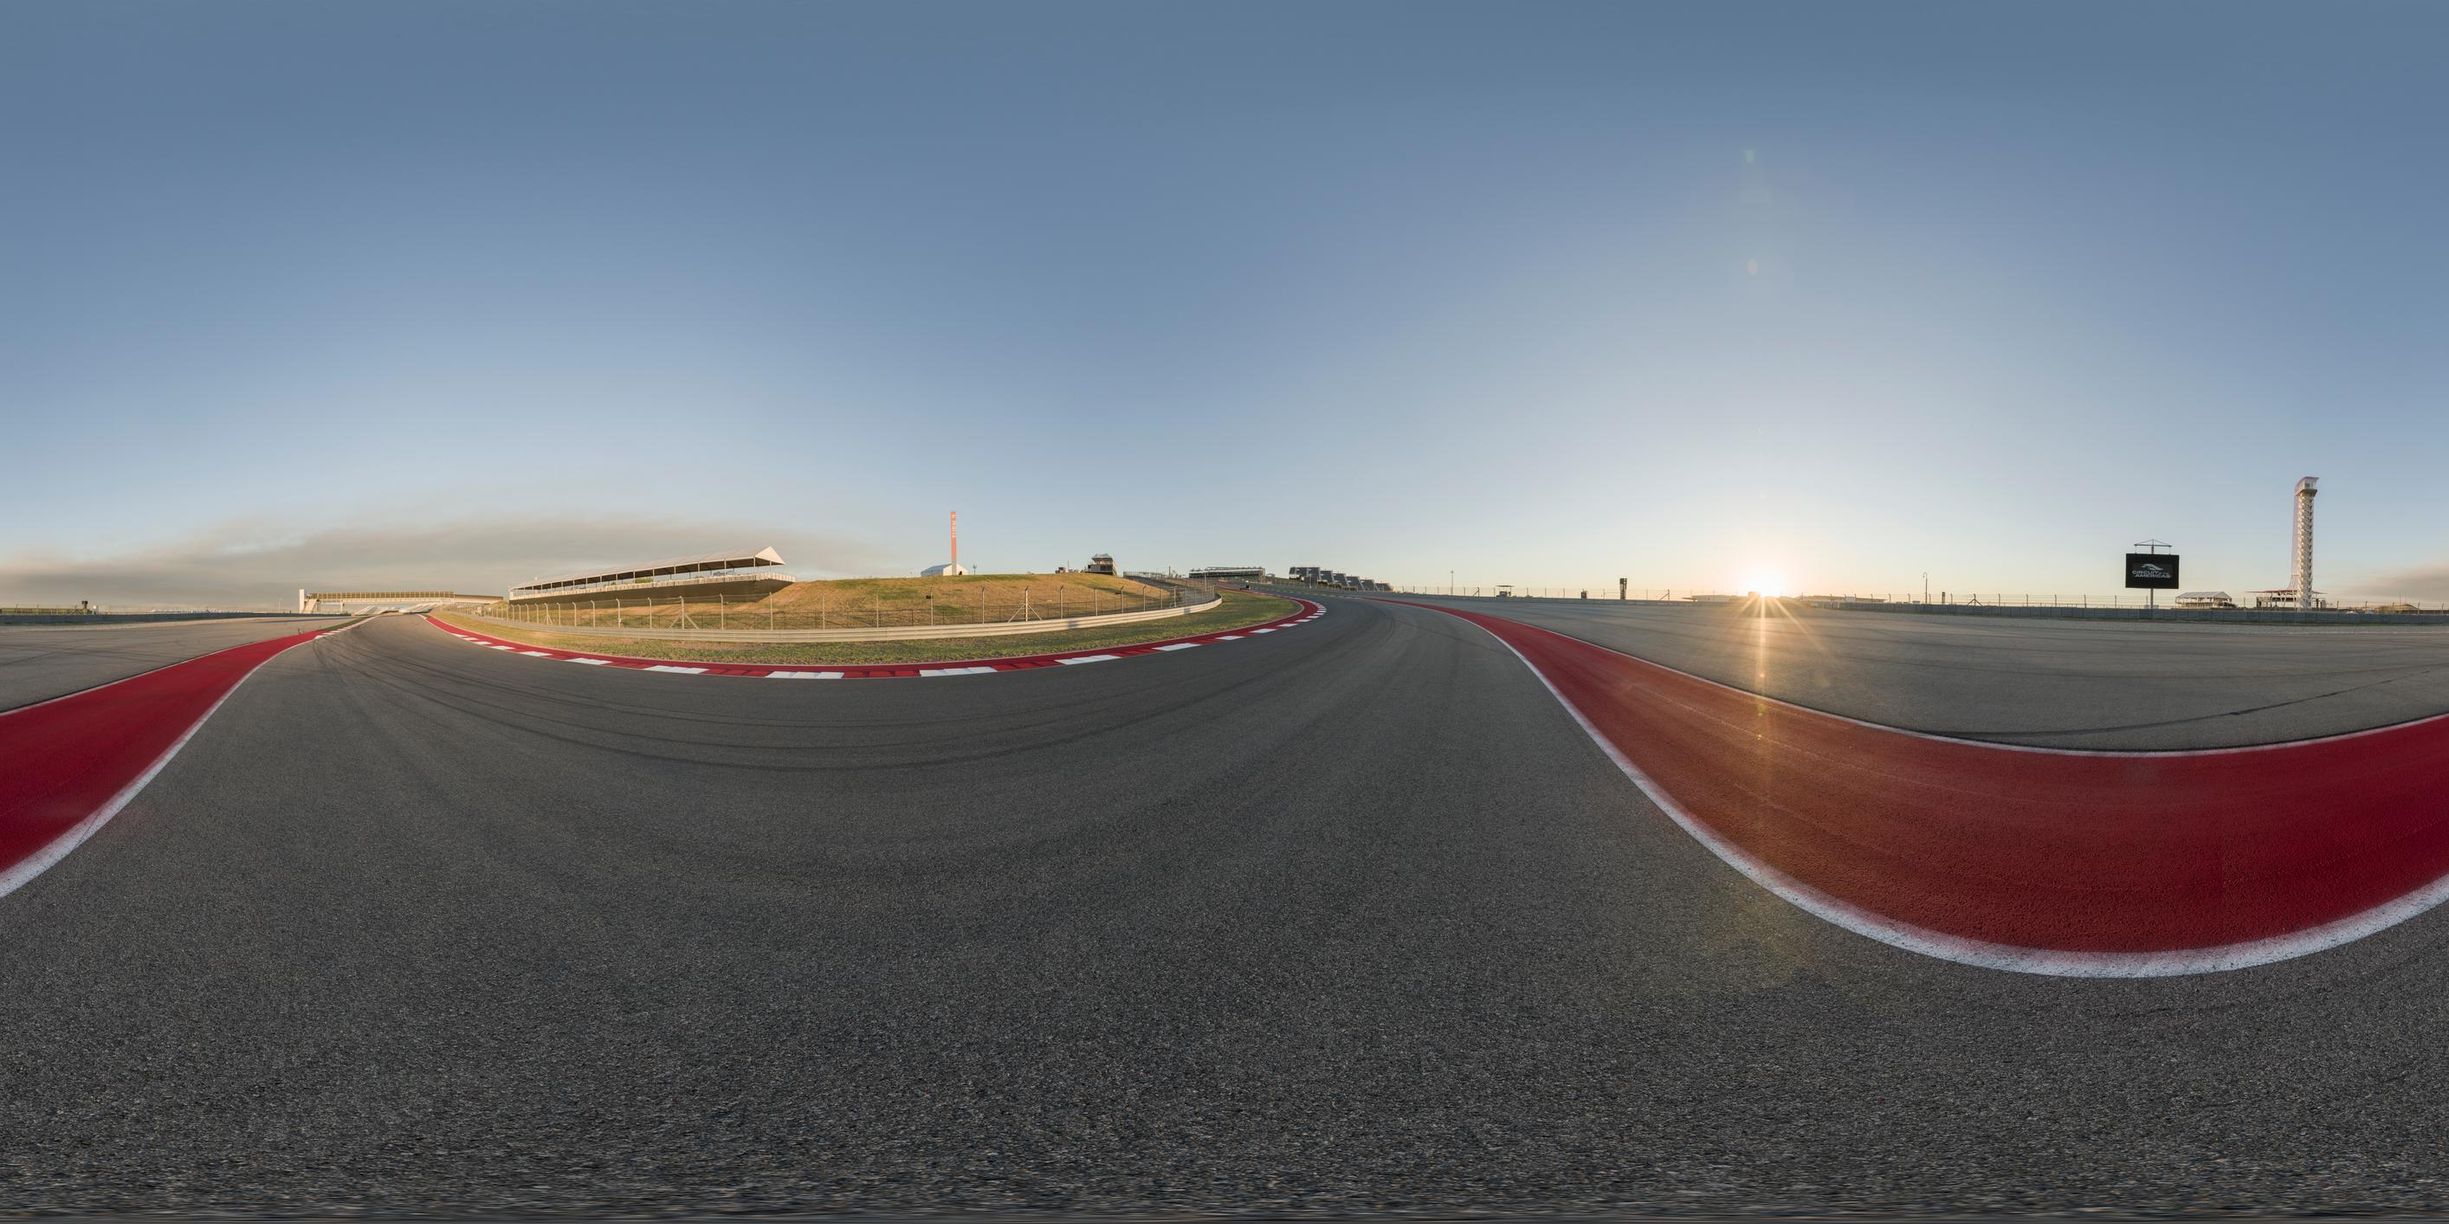 a picture taken while flying a motorcycle around the track at the same time as it is on